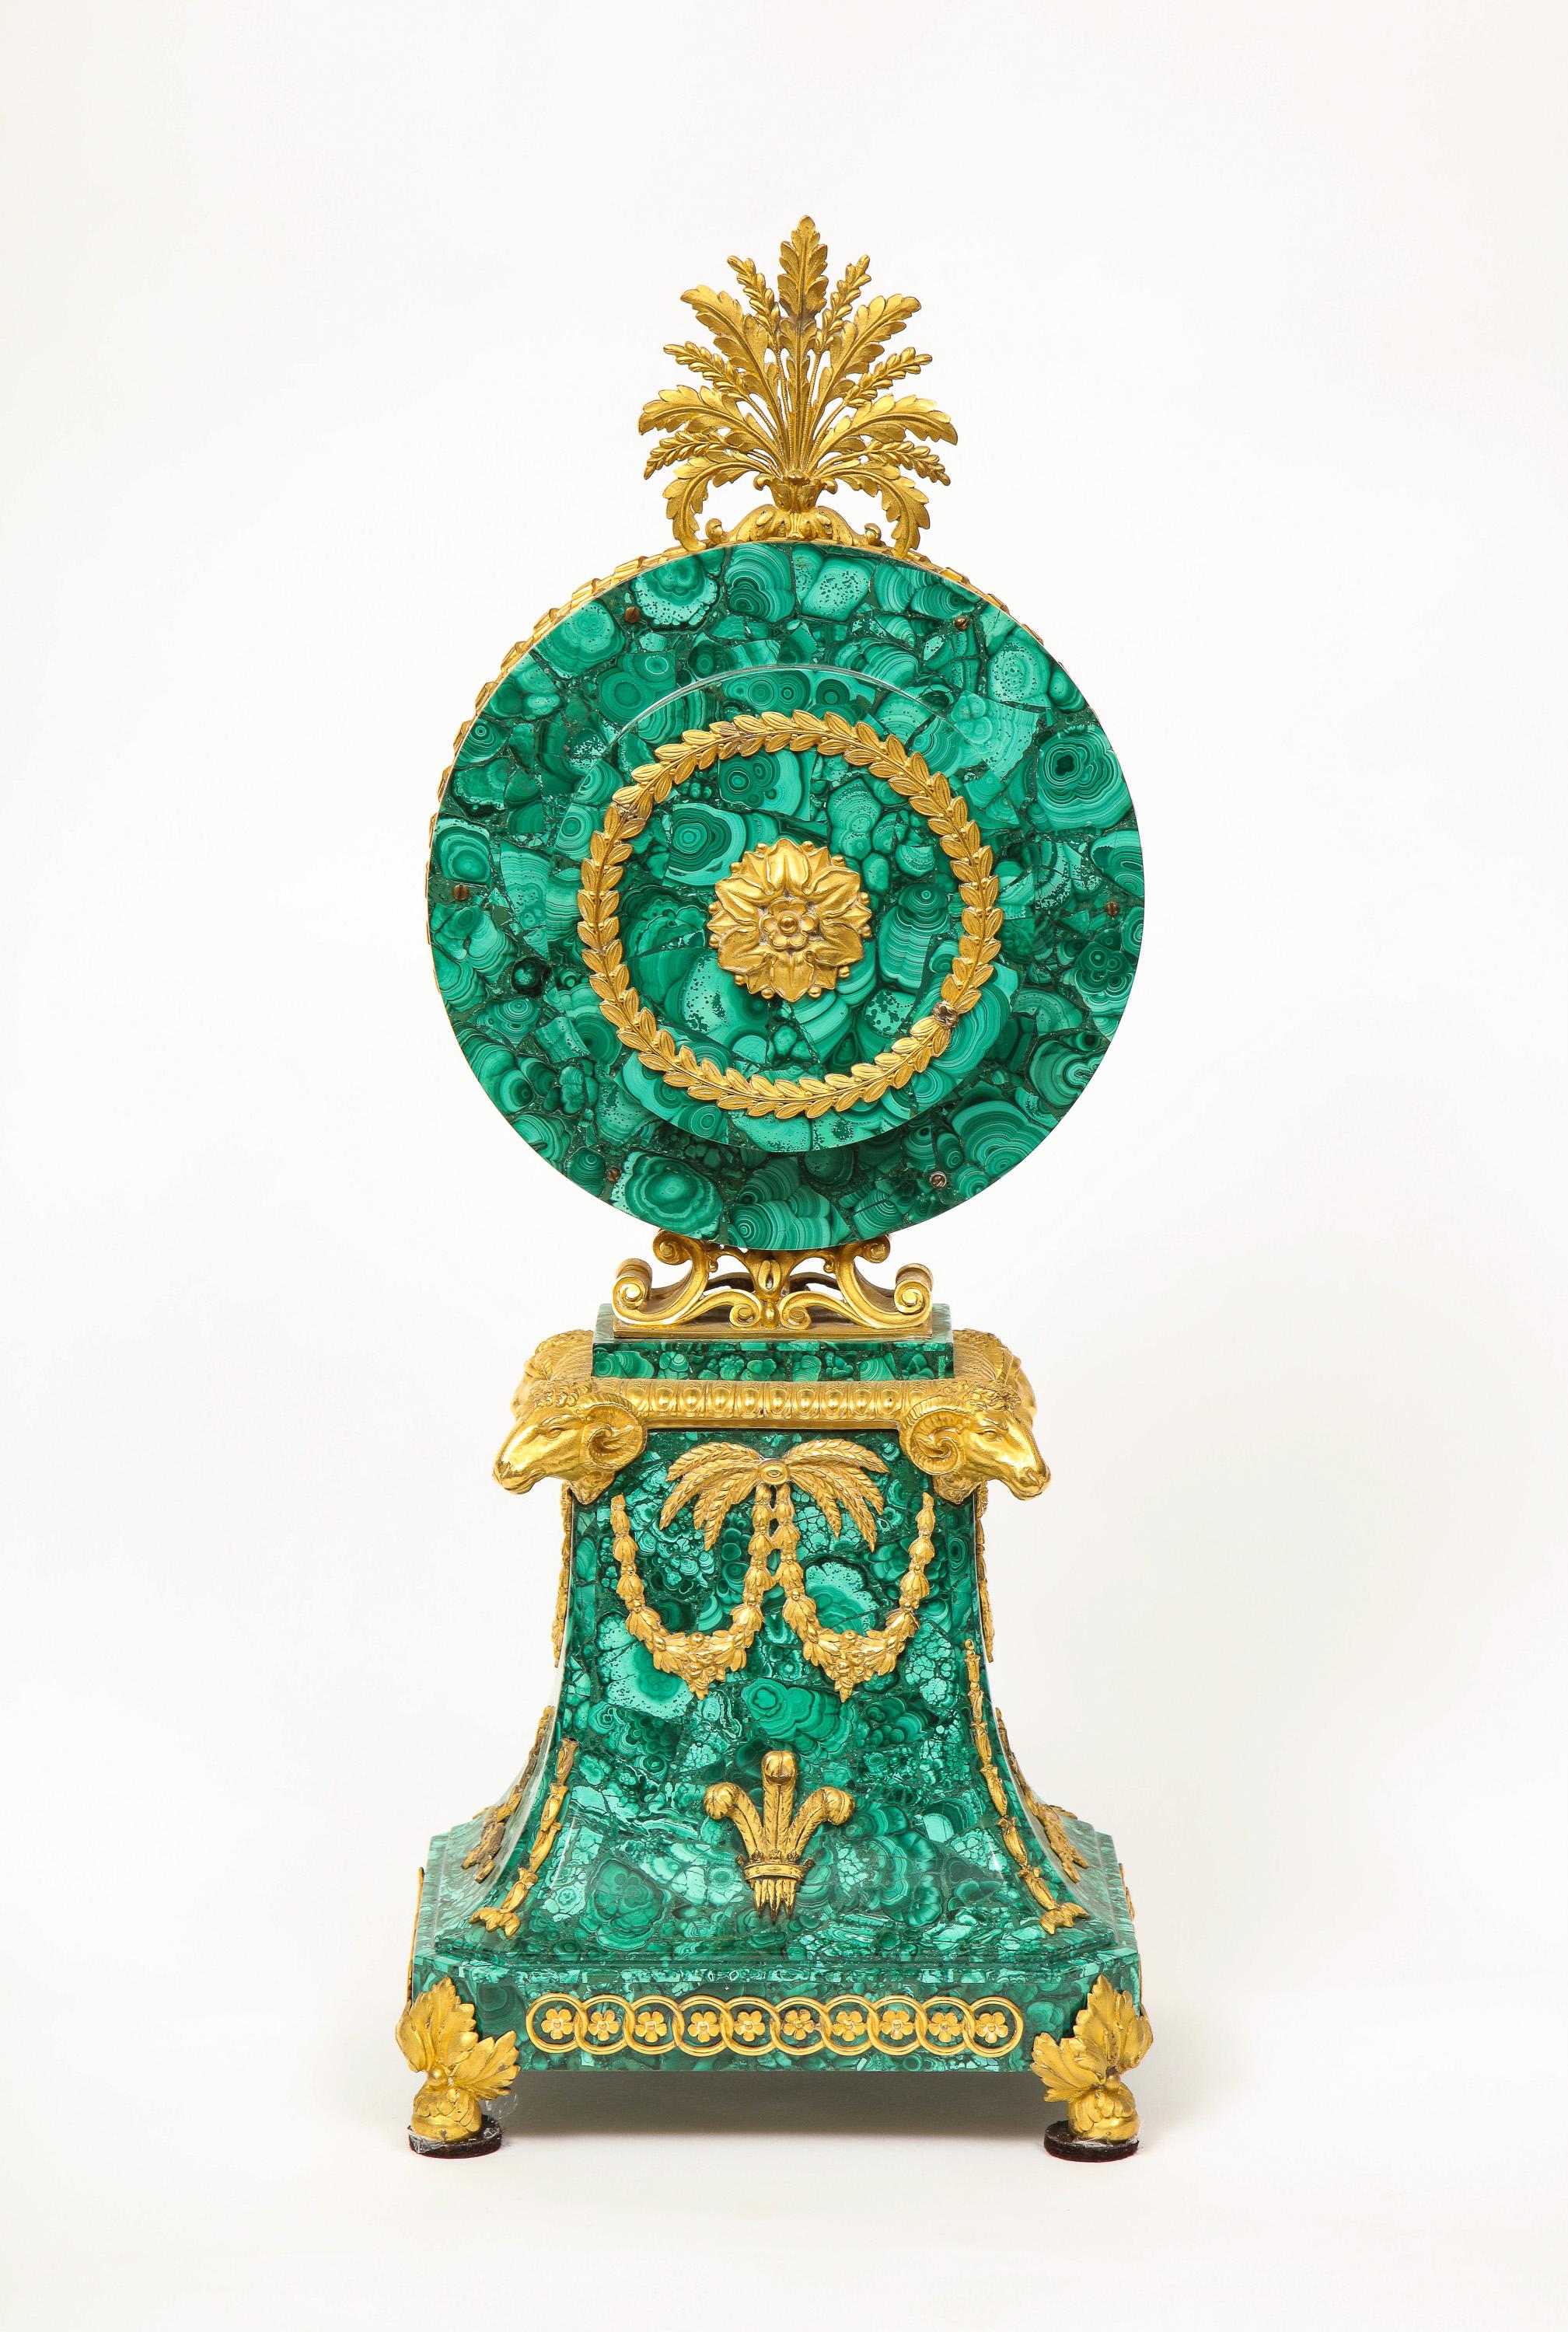 Edward F. Caldwell, An Extremely Fine and Rare Ormolu-Mounted Malachite Clock For Sale 3